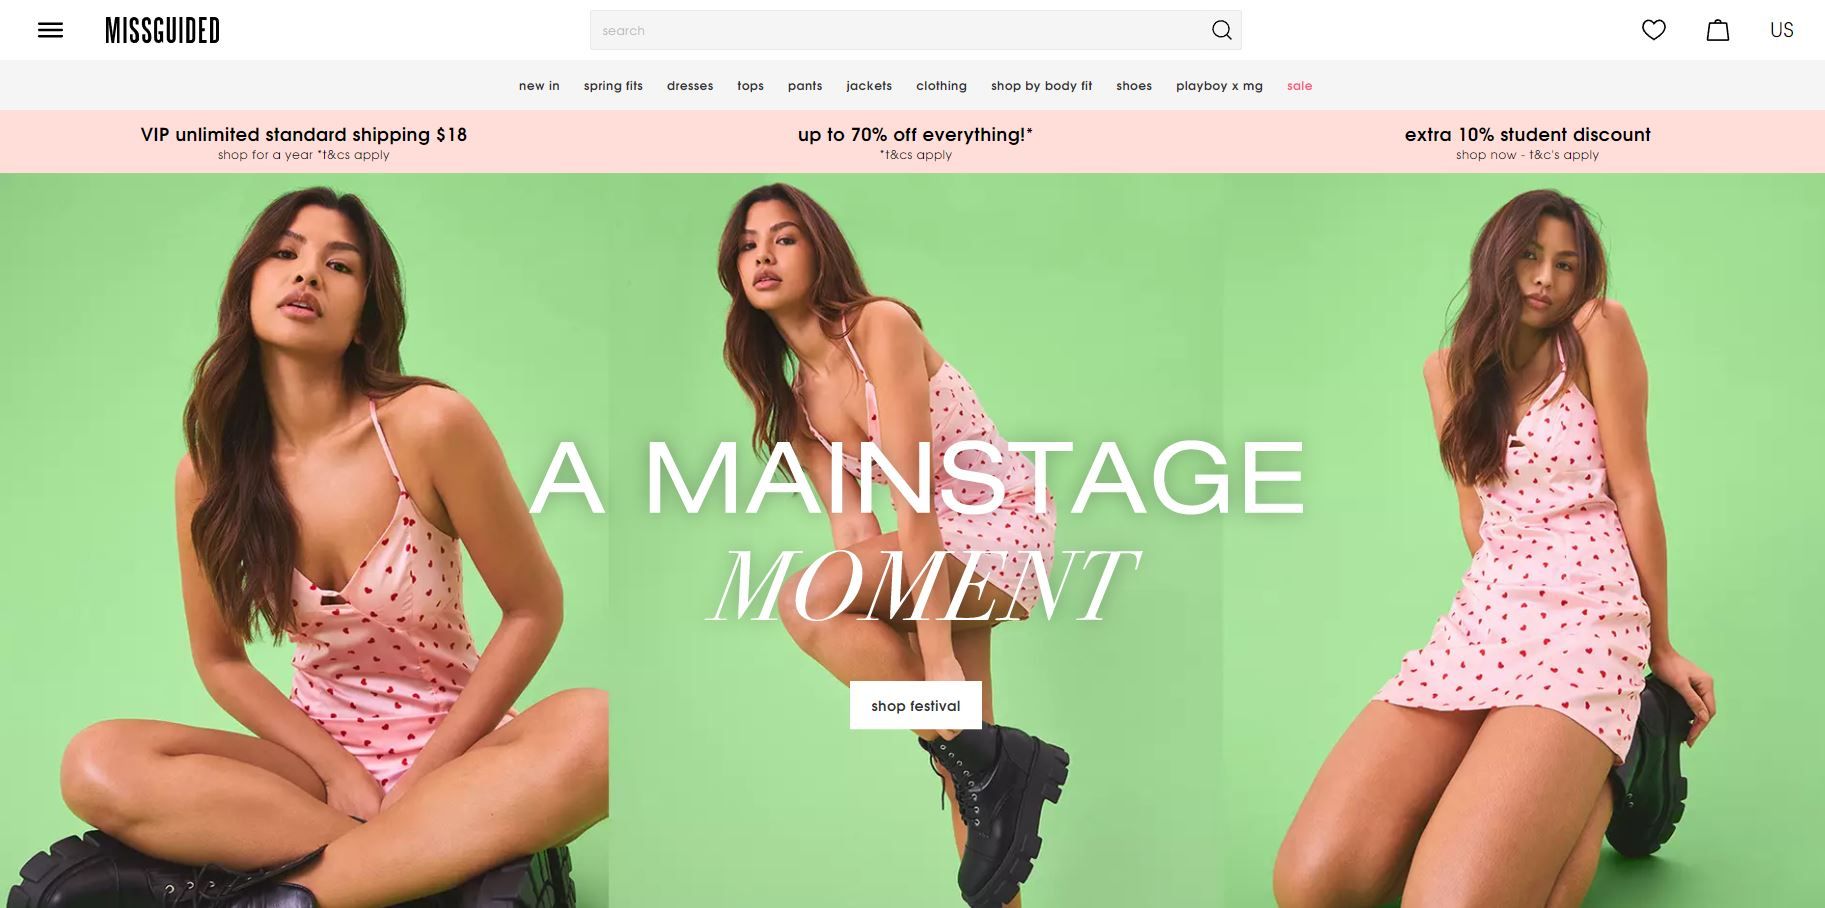 A Screenshot of Missguided's Landing Page